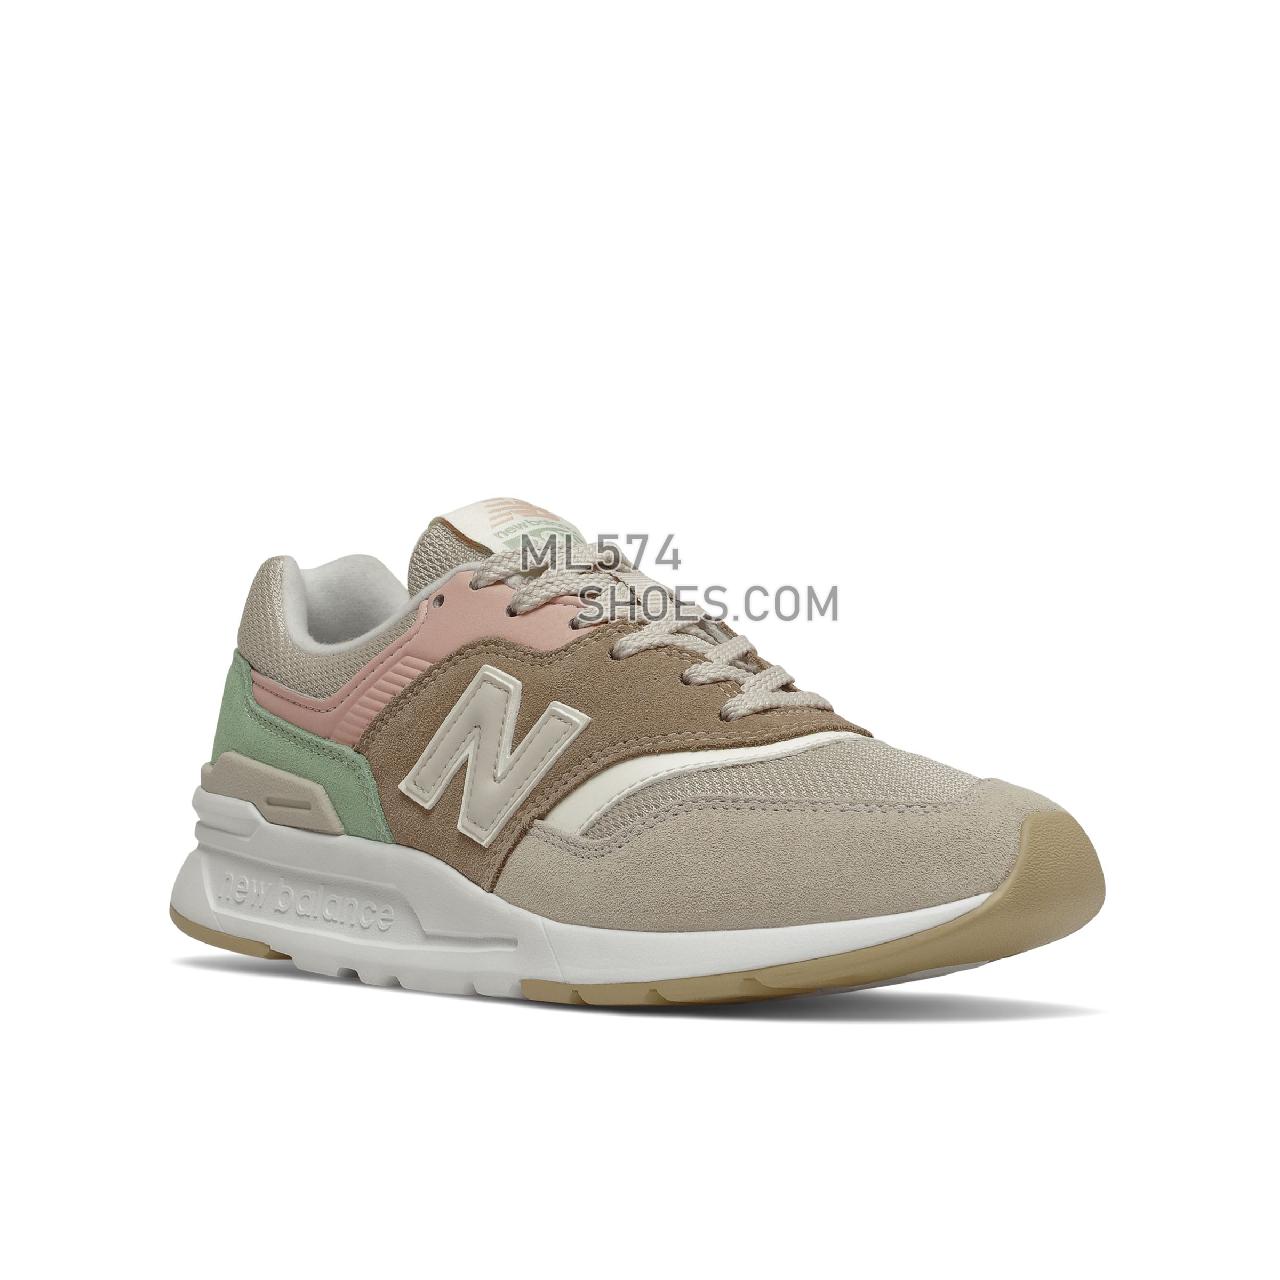 New Balance 997H - Women's Classic Sneakers - Tan with Pink - CW997HVD